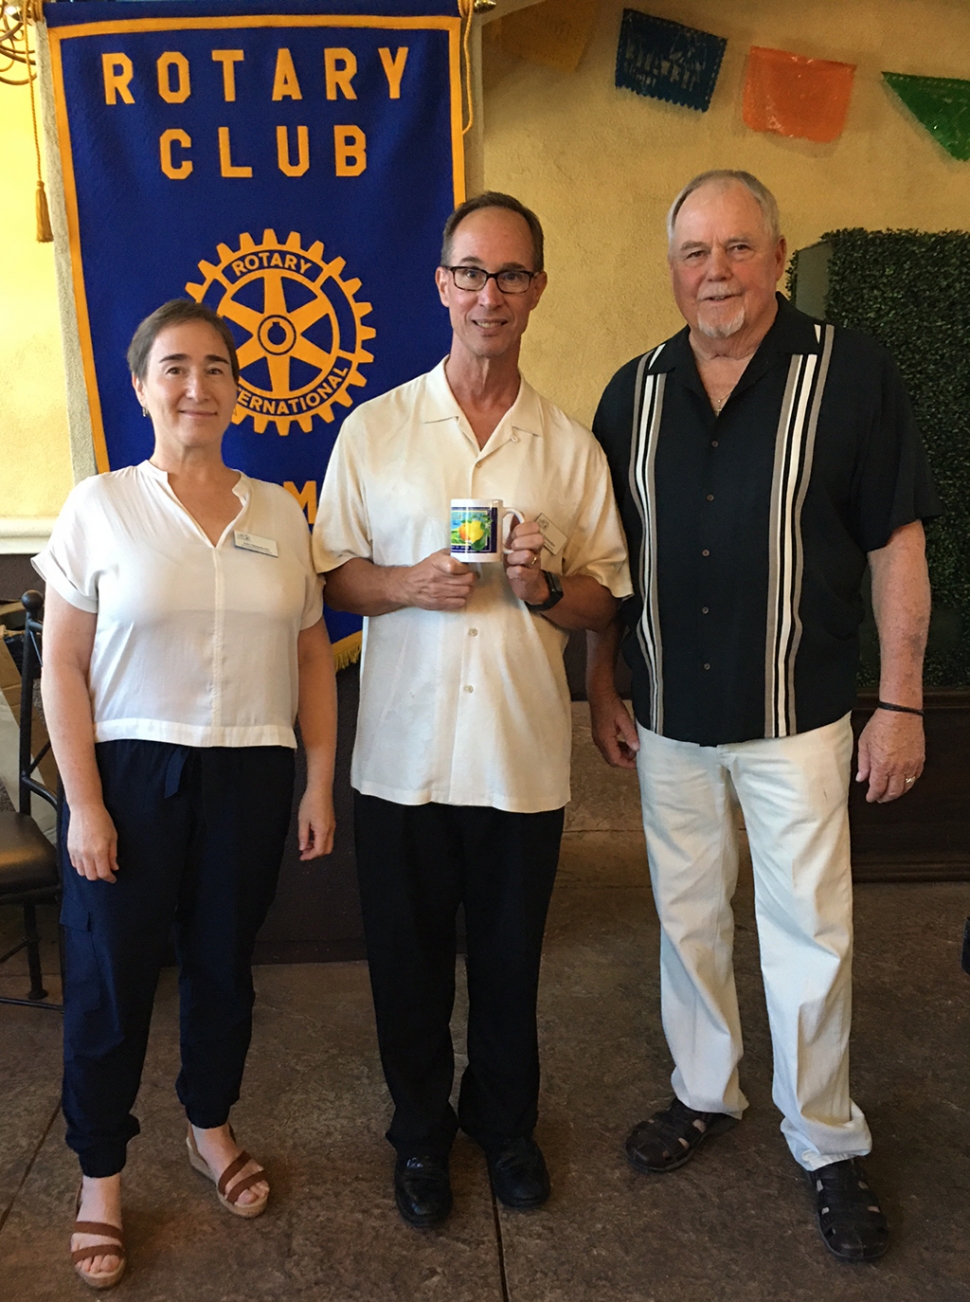 Last week’s Rotary Club speaker was Rick Schroeder from Many Mansions, along with Dalit Shlapobersky. Rick stated that the affordable housing Mountain View Apartments are completed and in the process of interviewing potential residents. There are 77 units with 1-3 bedrooms and there is also a large community space. They are partnering with the Boys & Girls Club and will have a similar club/homework help site for resident students. Many Mansions also offers a scholarship program for resident students who are going on to higher education. They have various resources and help for adults also. The company has 18 housing complexes in Ventura County and four in LA County. Dalit is in charge of fundraising to augment funds from county, state, etc. Pictured are Dalit Shlapobersky and Rick Schroeder from Many Mansions, and Rotary President Dave Andersen. Photo credit Martha Richardson.